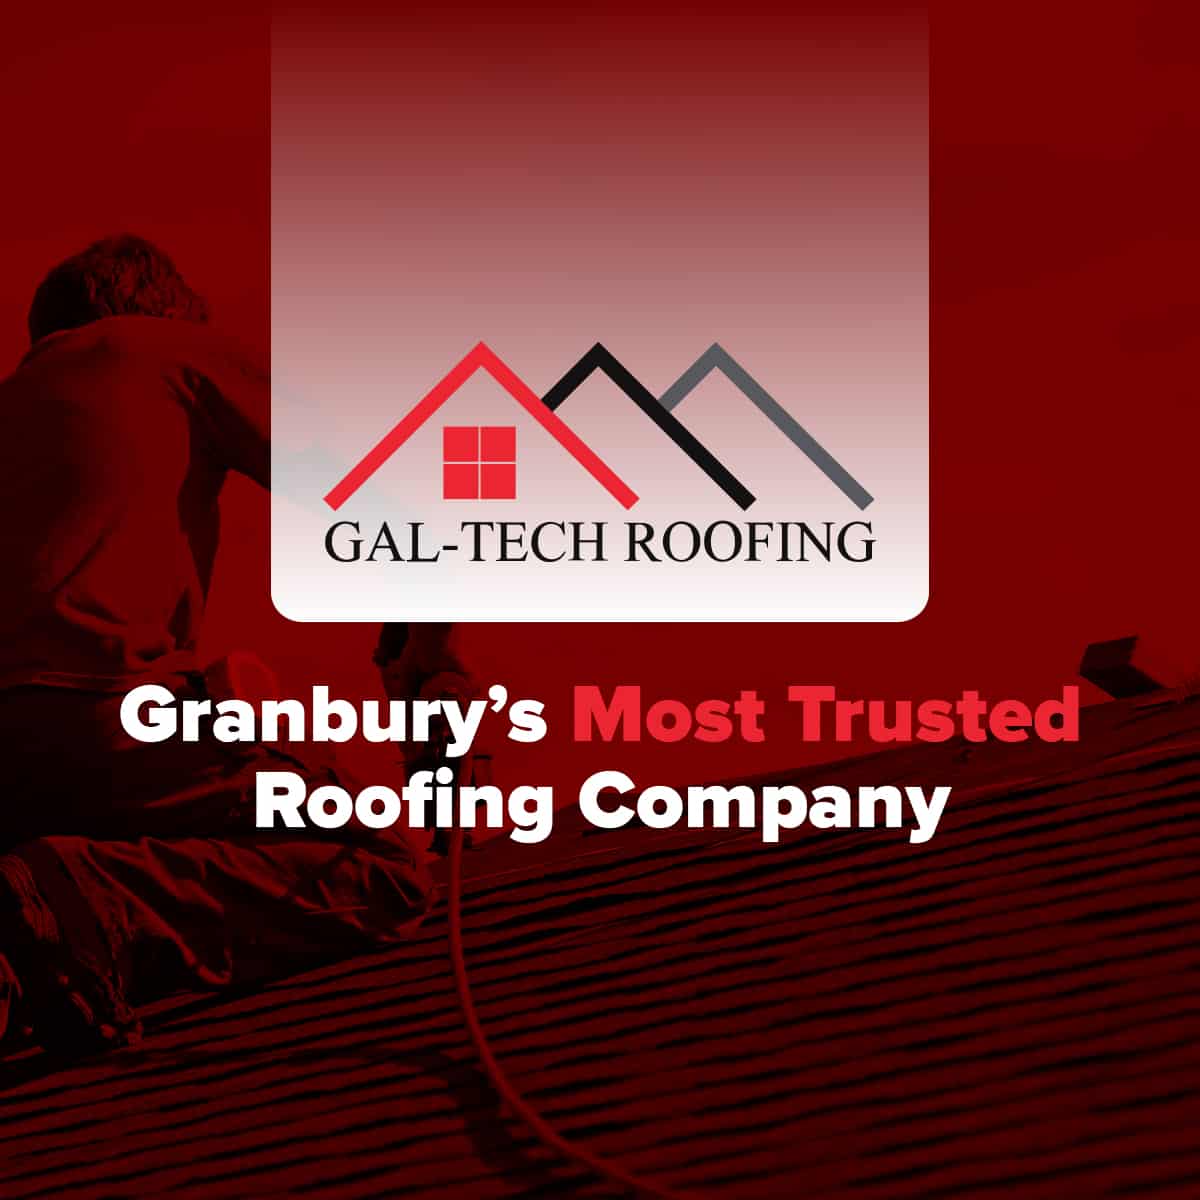 Generic Roof Logo - GAL-TECH ROOFING | Affordable Roofer in Granbury, Texas